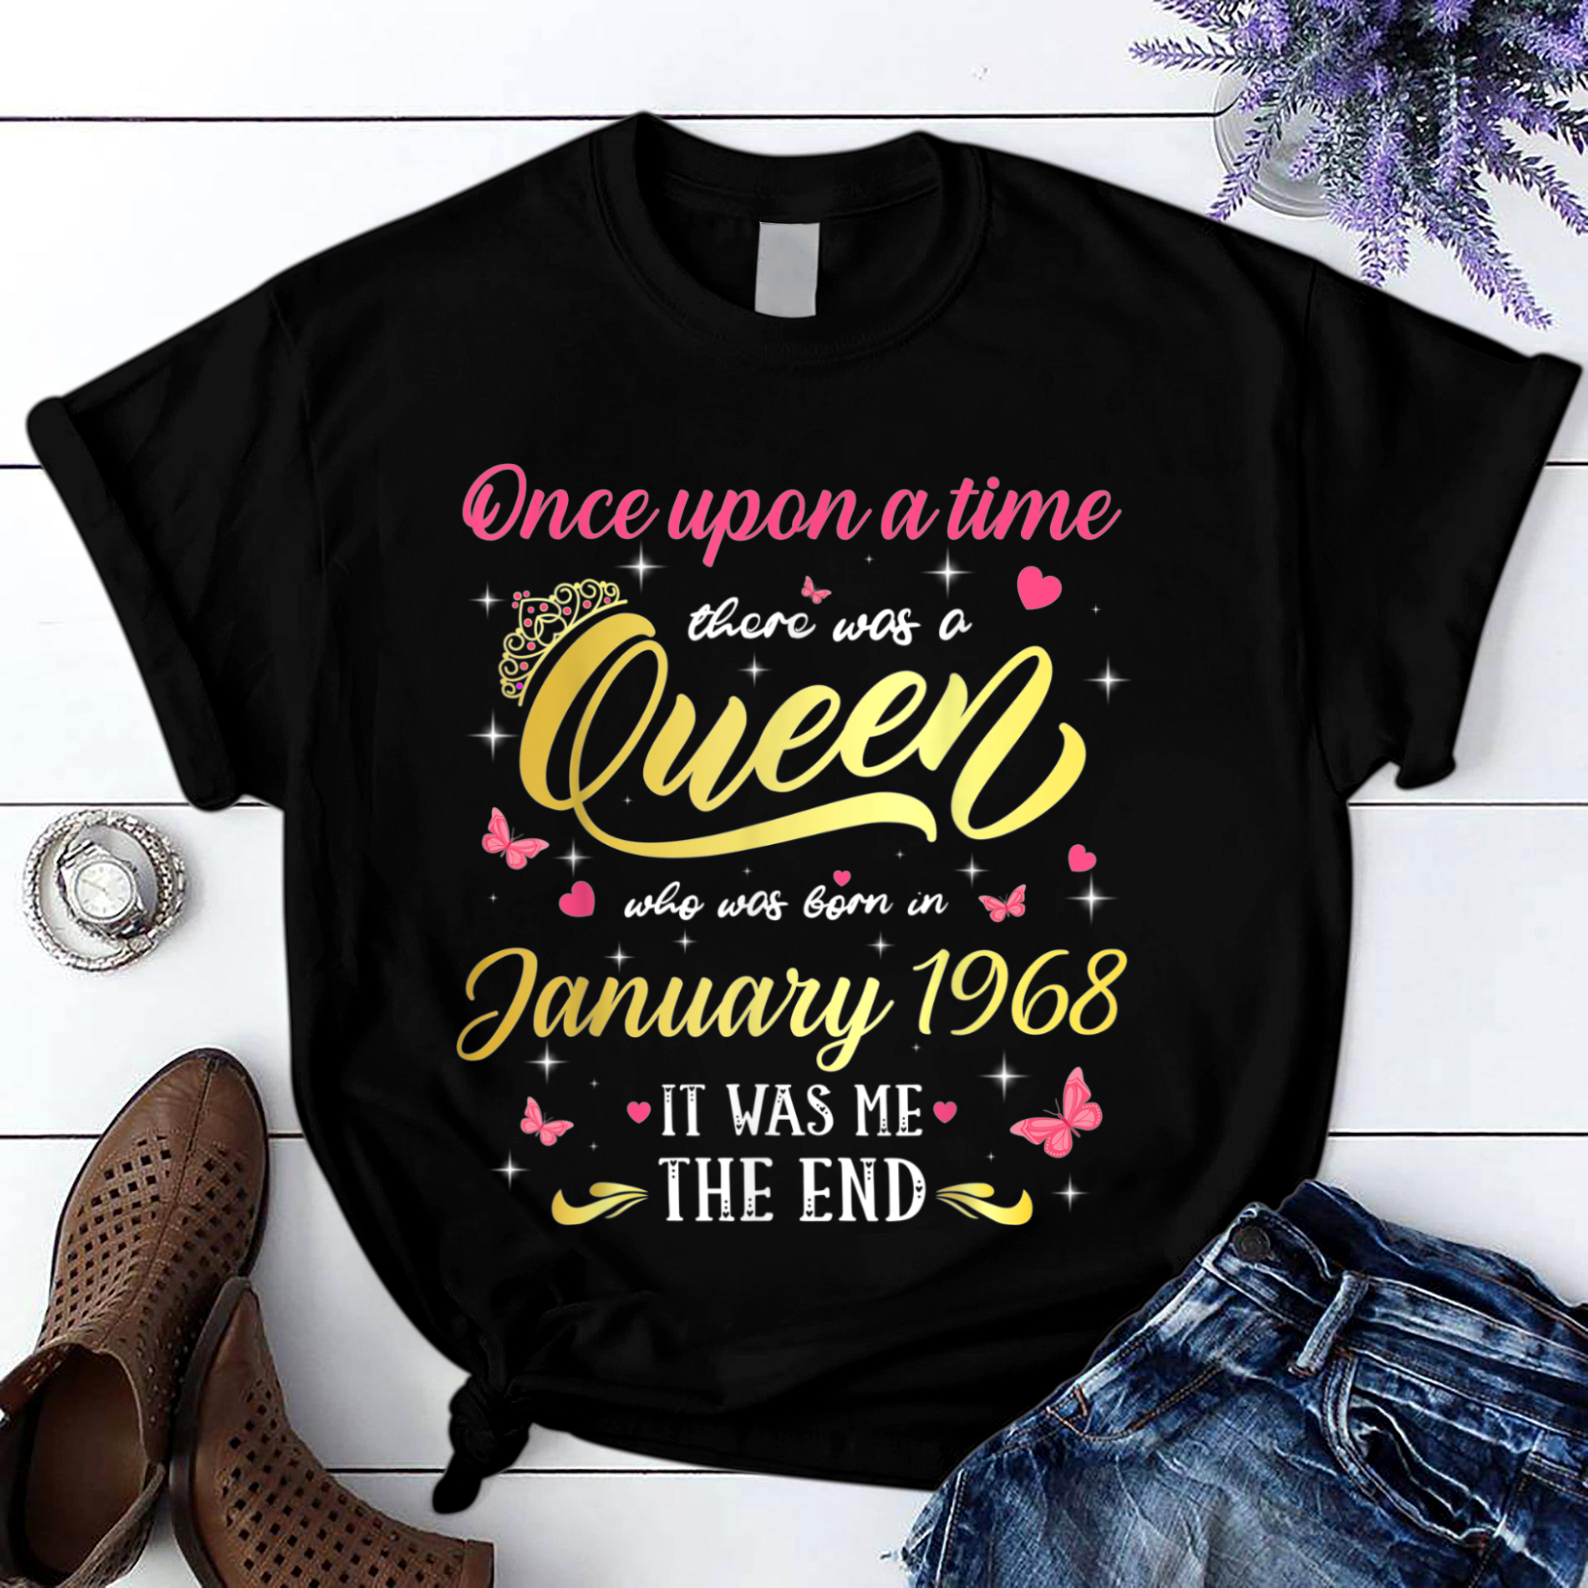 Once Upon A Time There Was A Queen Was Born In January 1968 T Shirt Black Unisex S-6XL